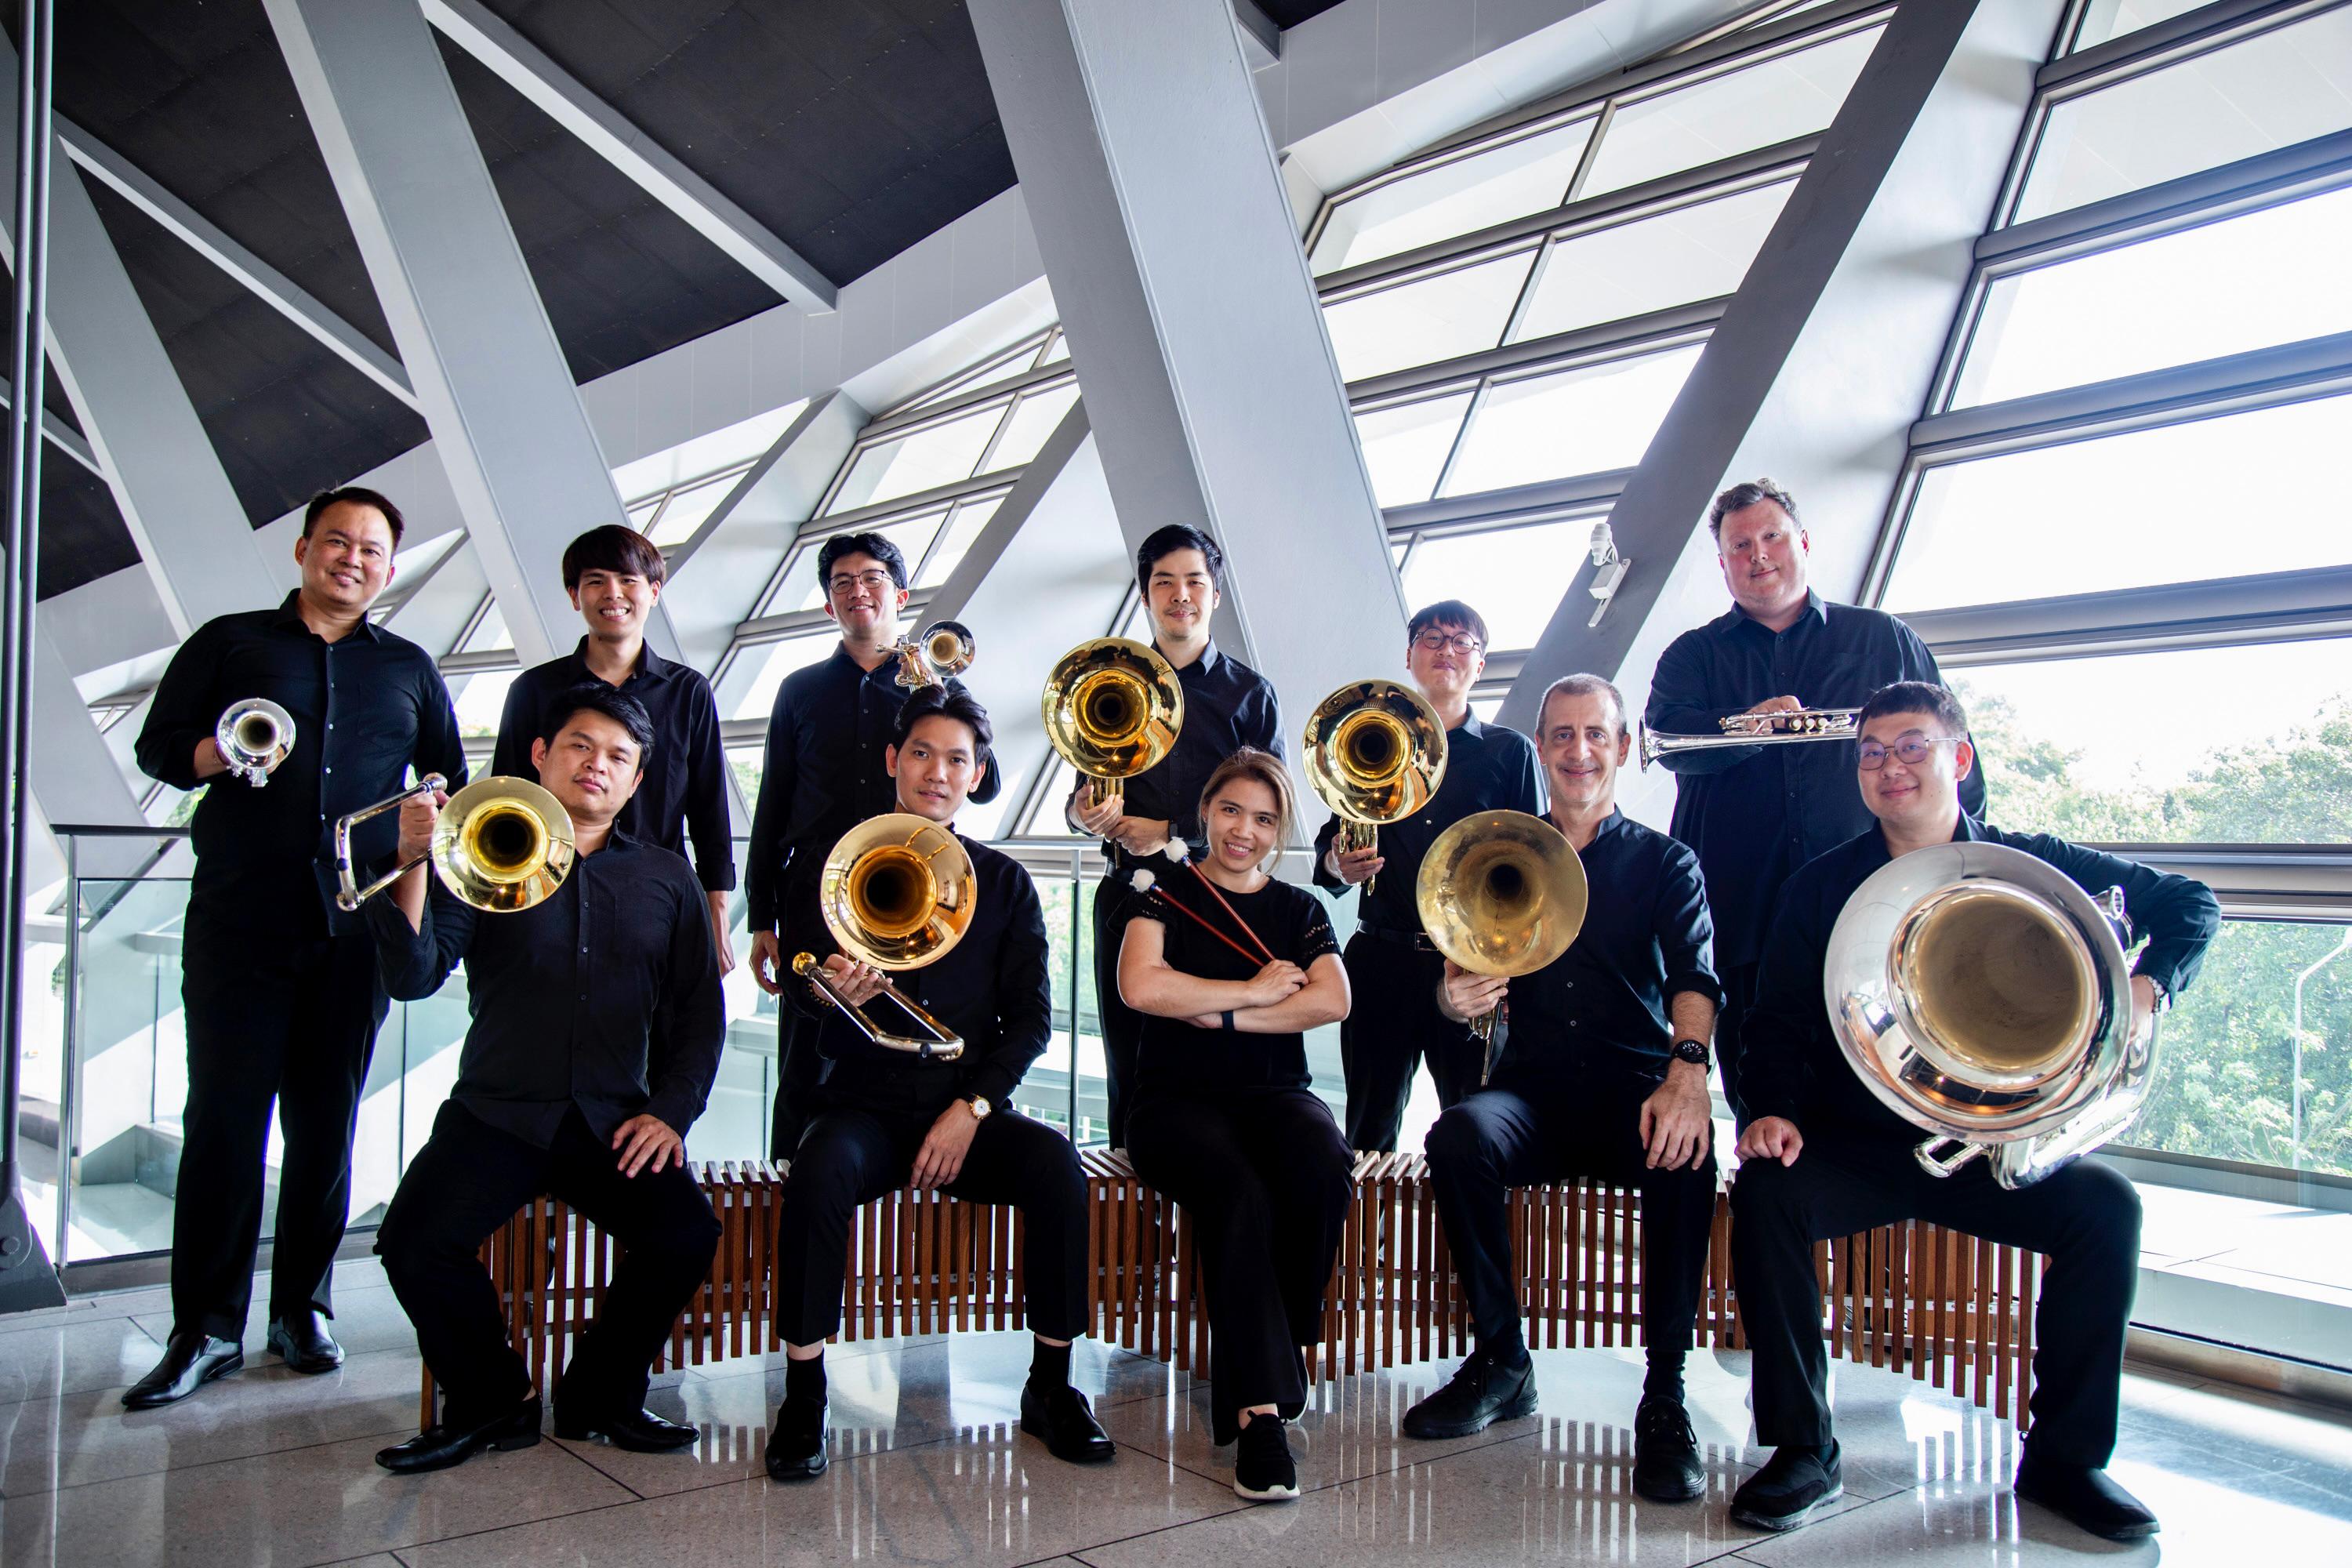 The Hong Kong Week 2023@Bangkok will be held in Bangkok, Thailand, from October 21 to November 12. The brass and percussion sections of the Hong Kong Philharmonic Orchestra and the Thailand Philharmonic Orchestra will jointly perform a chamber concert "Brass and Percussion". Photo shows the brass and percussion section of the Thailand Philharmonic Orchestra.